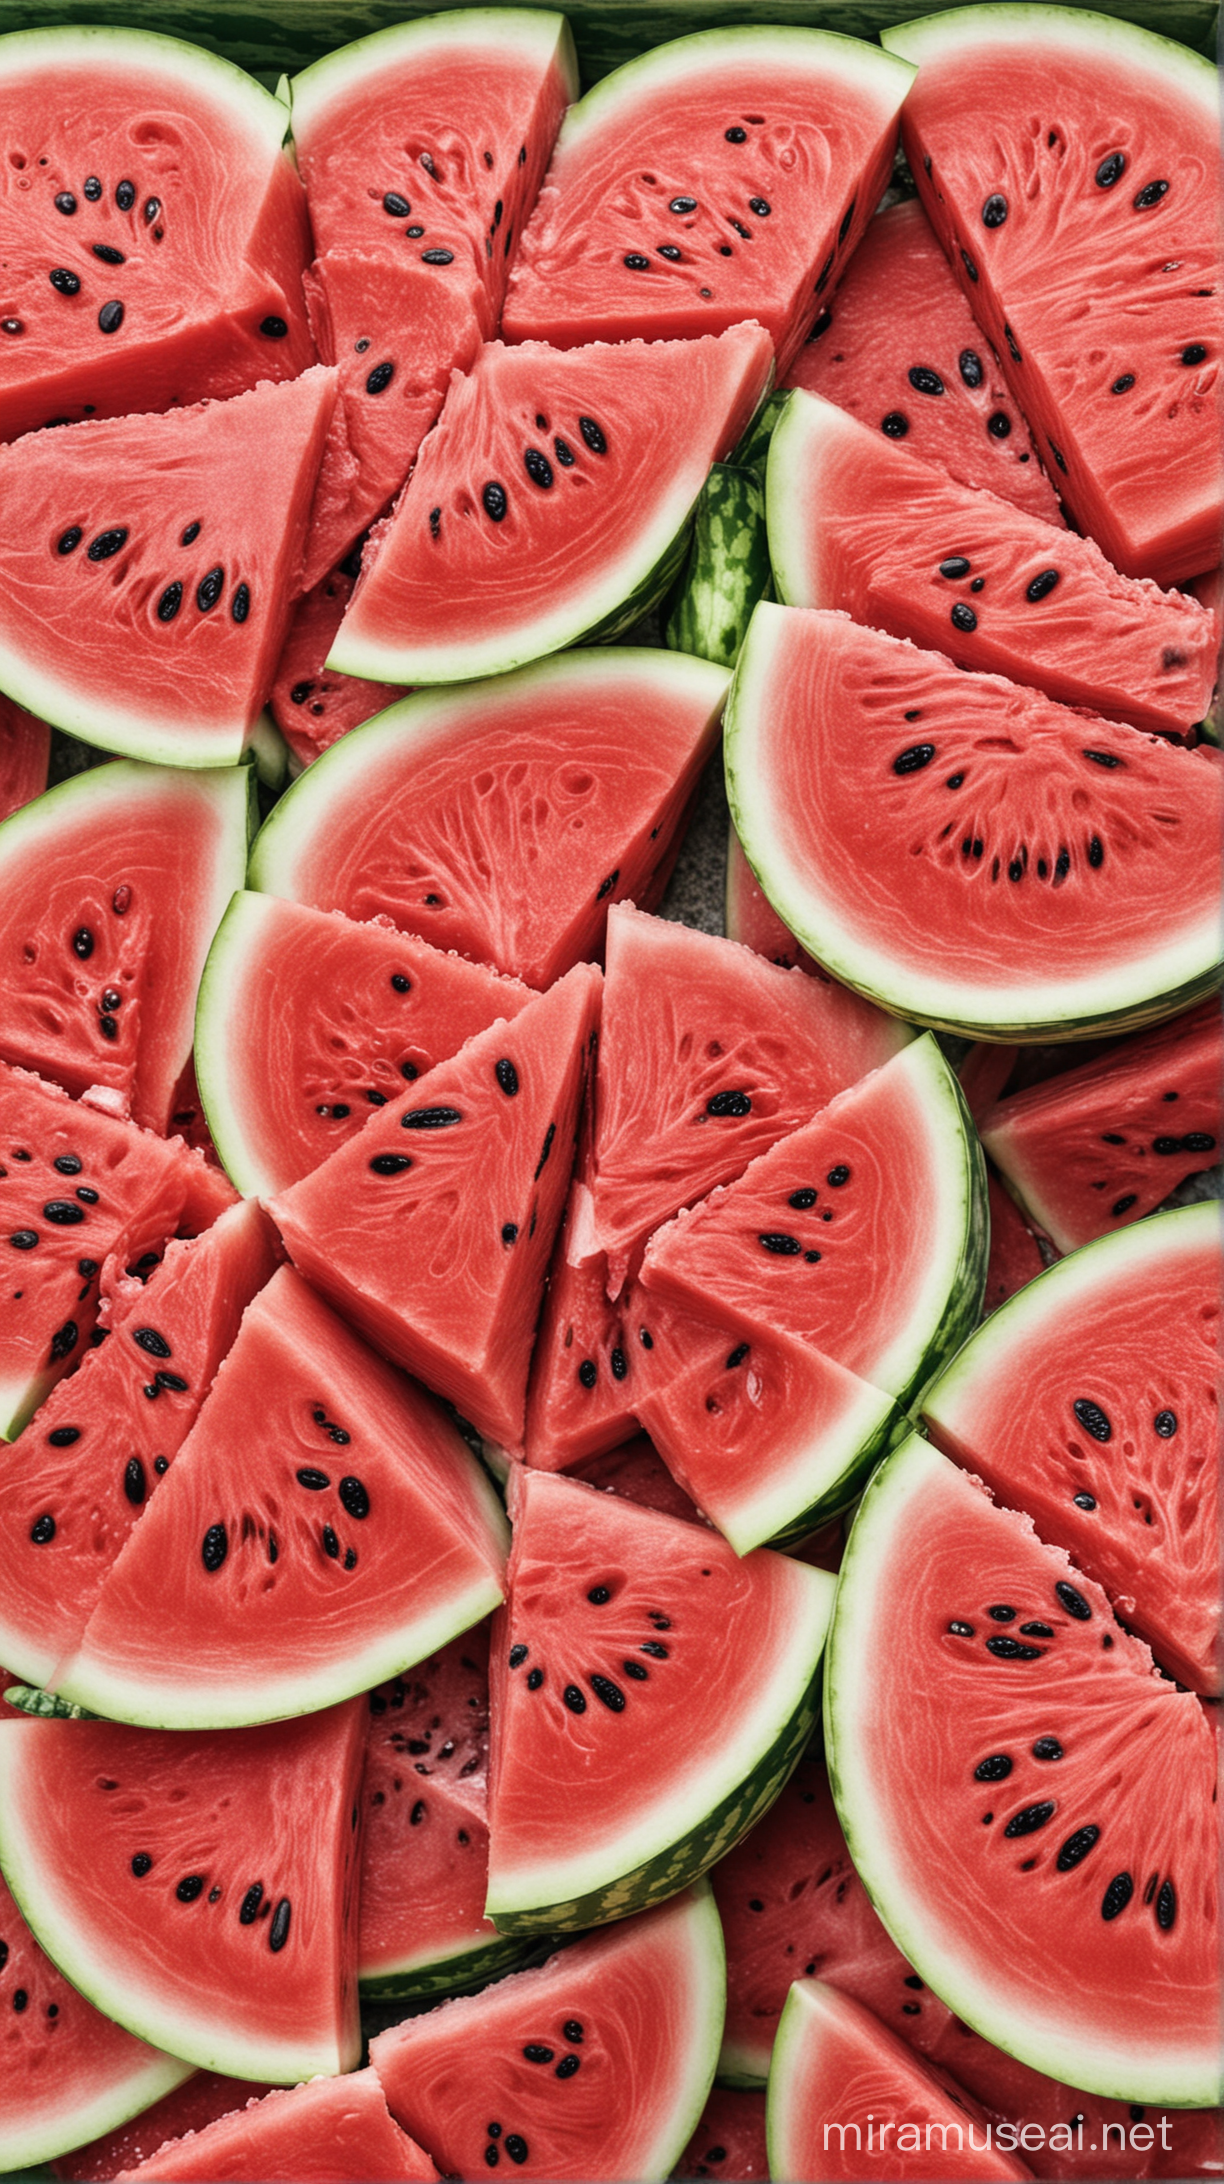 Juicy Watermelon Slices on Summer Picnic Table